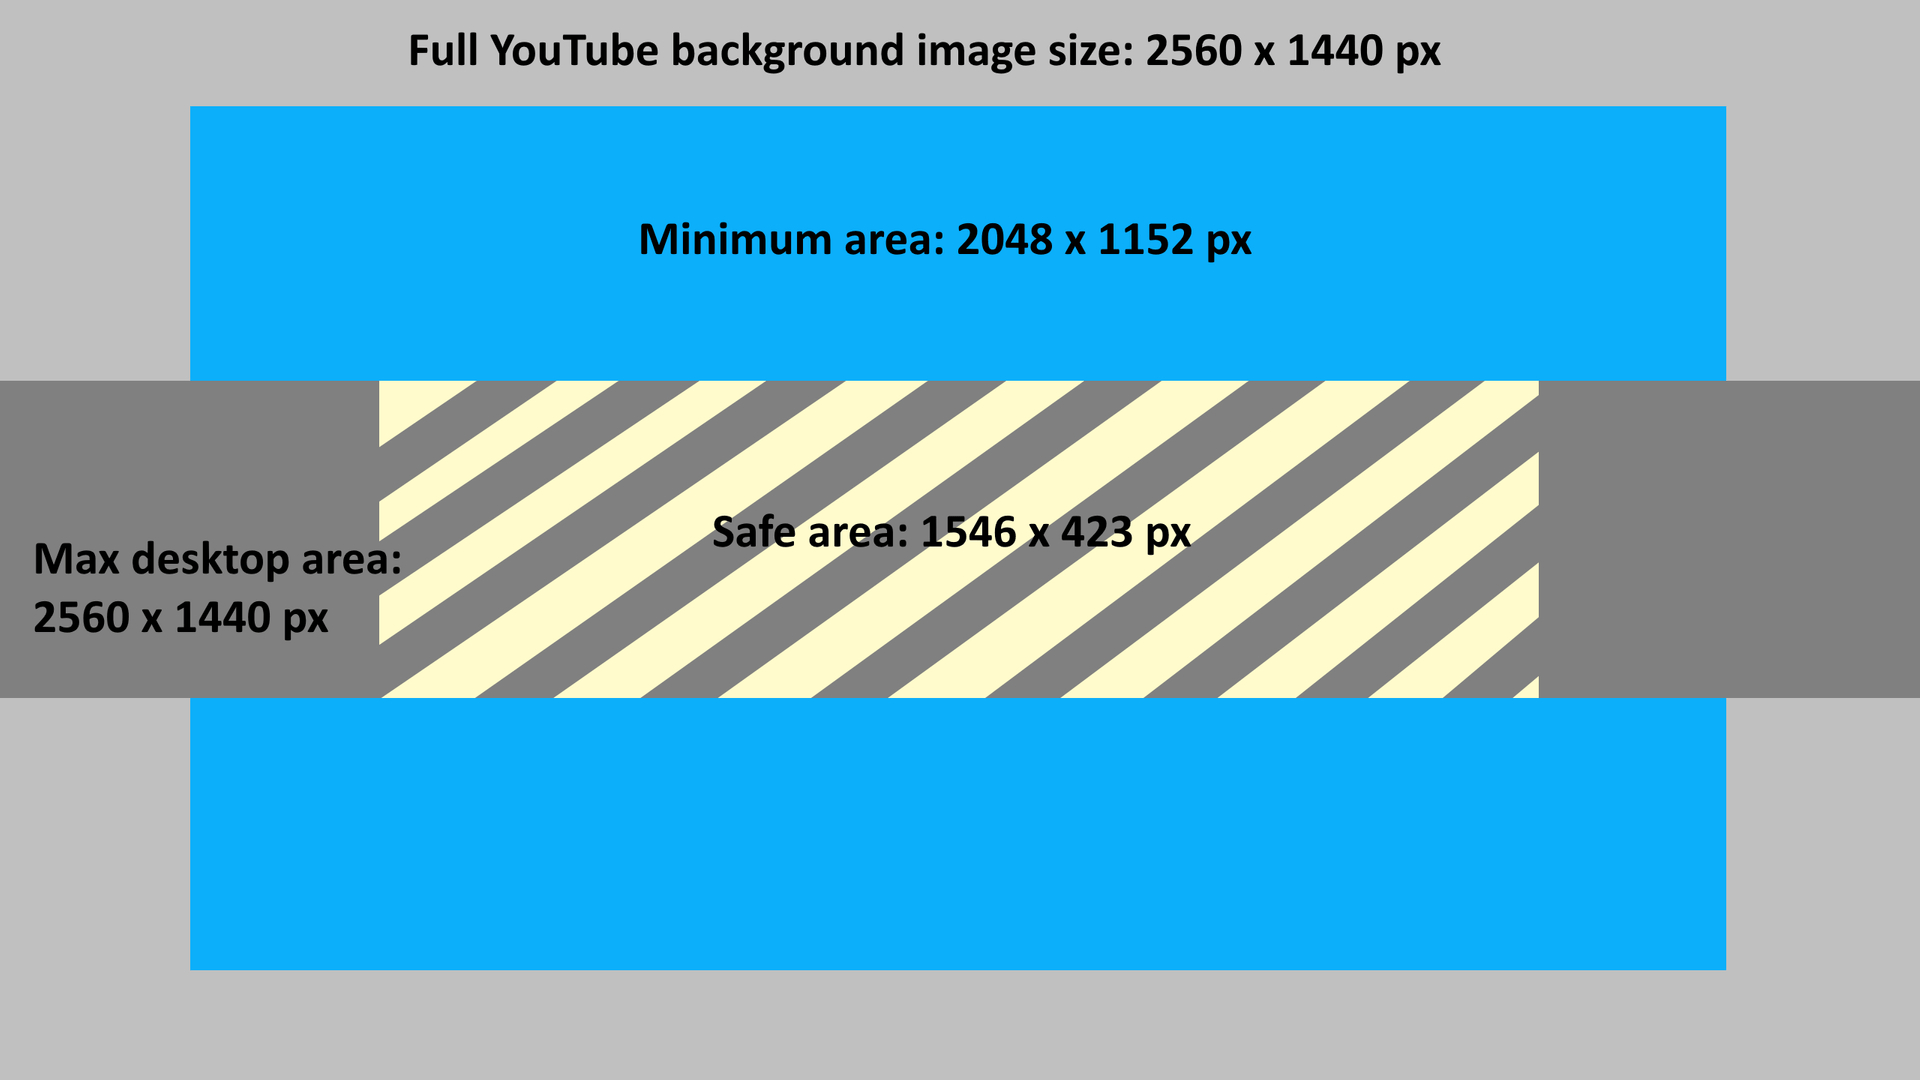 The Best Youtube Banner Size In 2019 + Best Practices For Intended For Youtube Banner Size Template